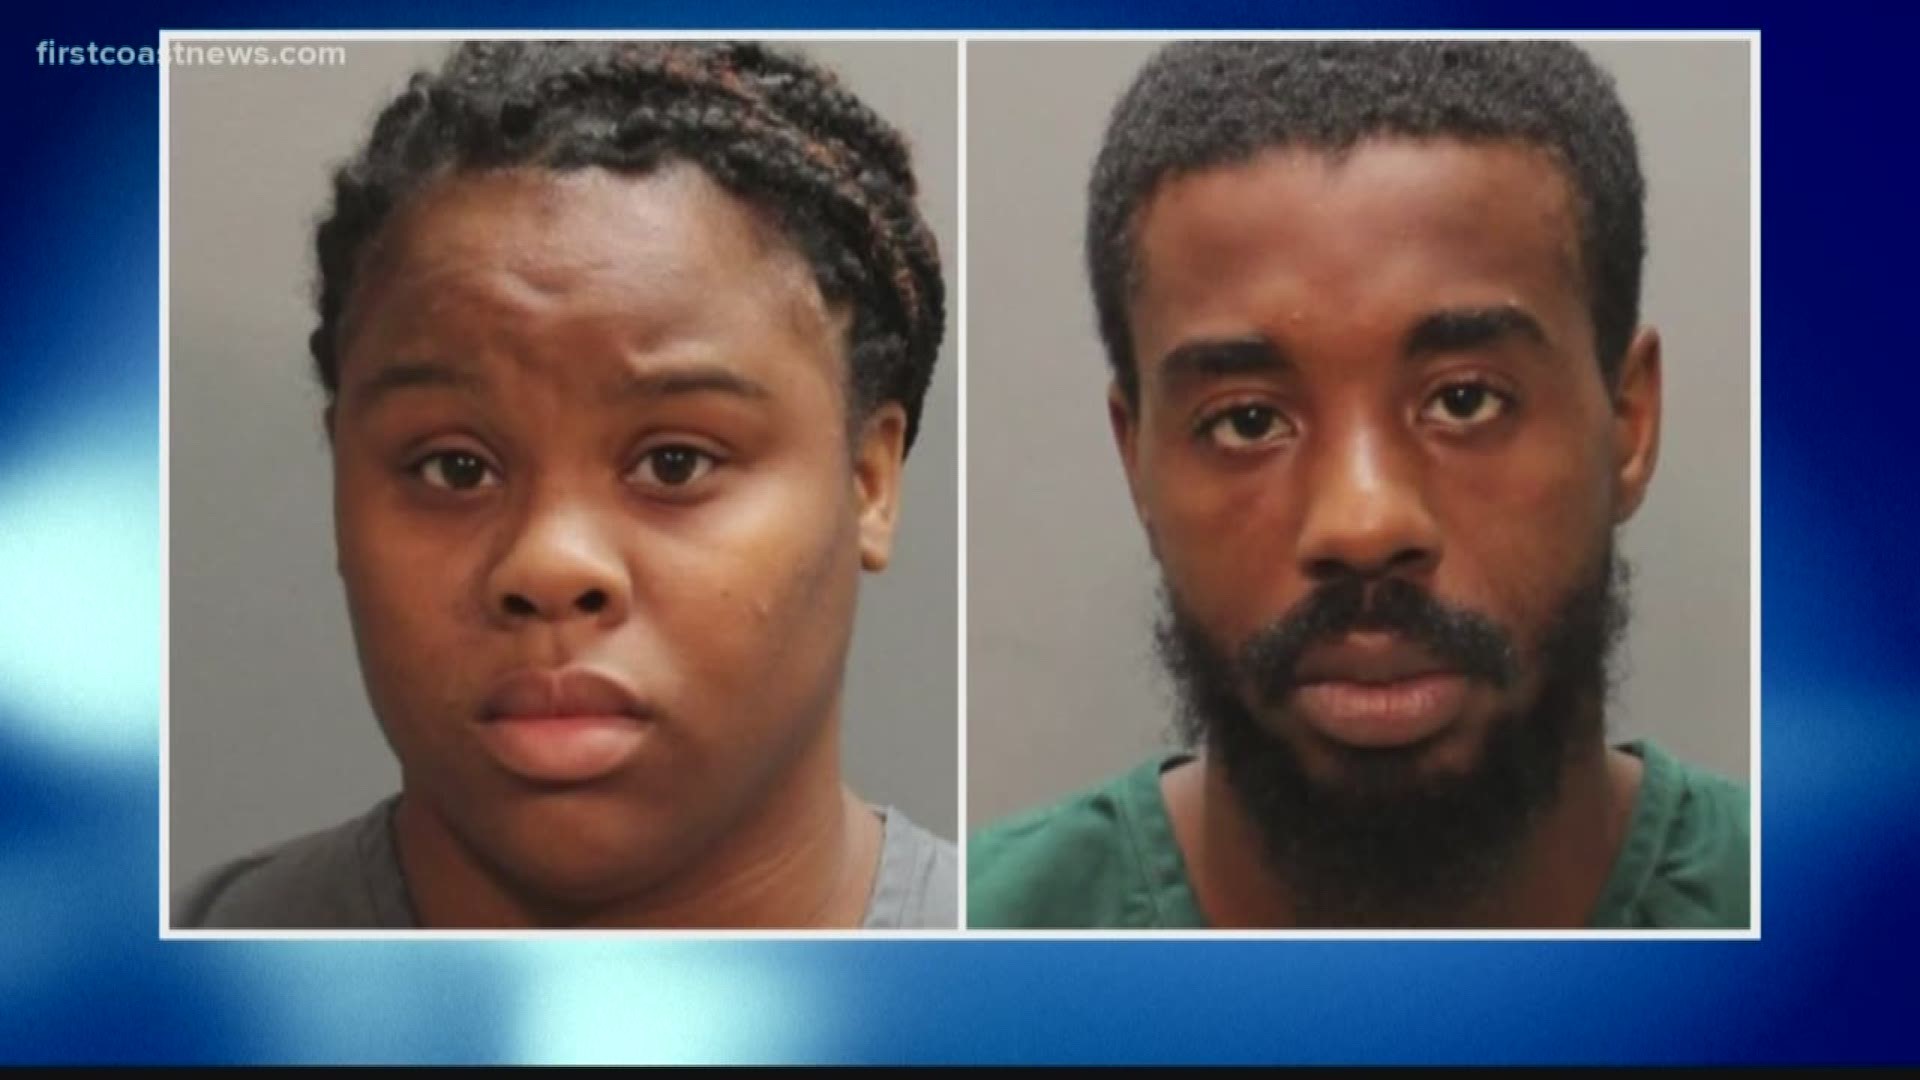 A Jacksonville couple was arrested after allegedly abusing a 5-year-old child to death, according to police.